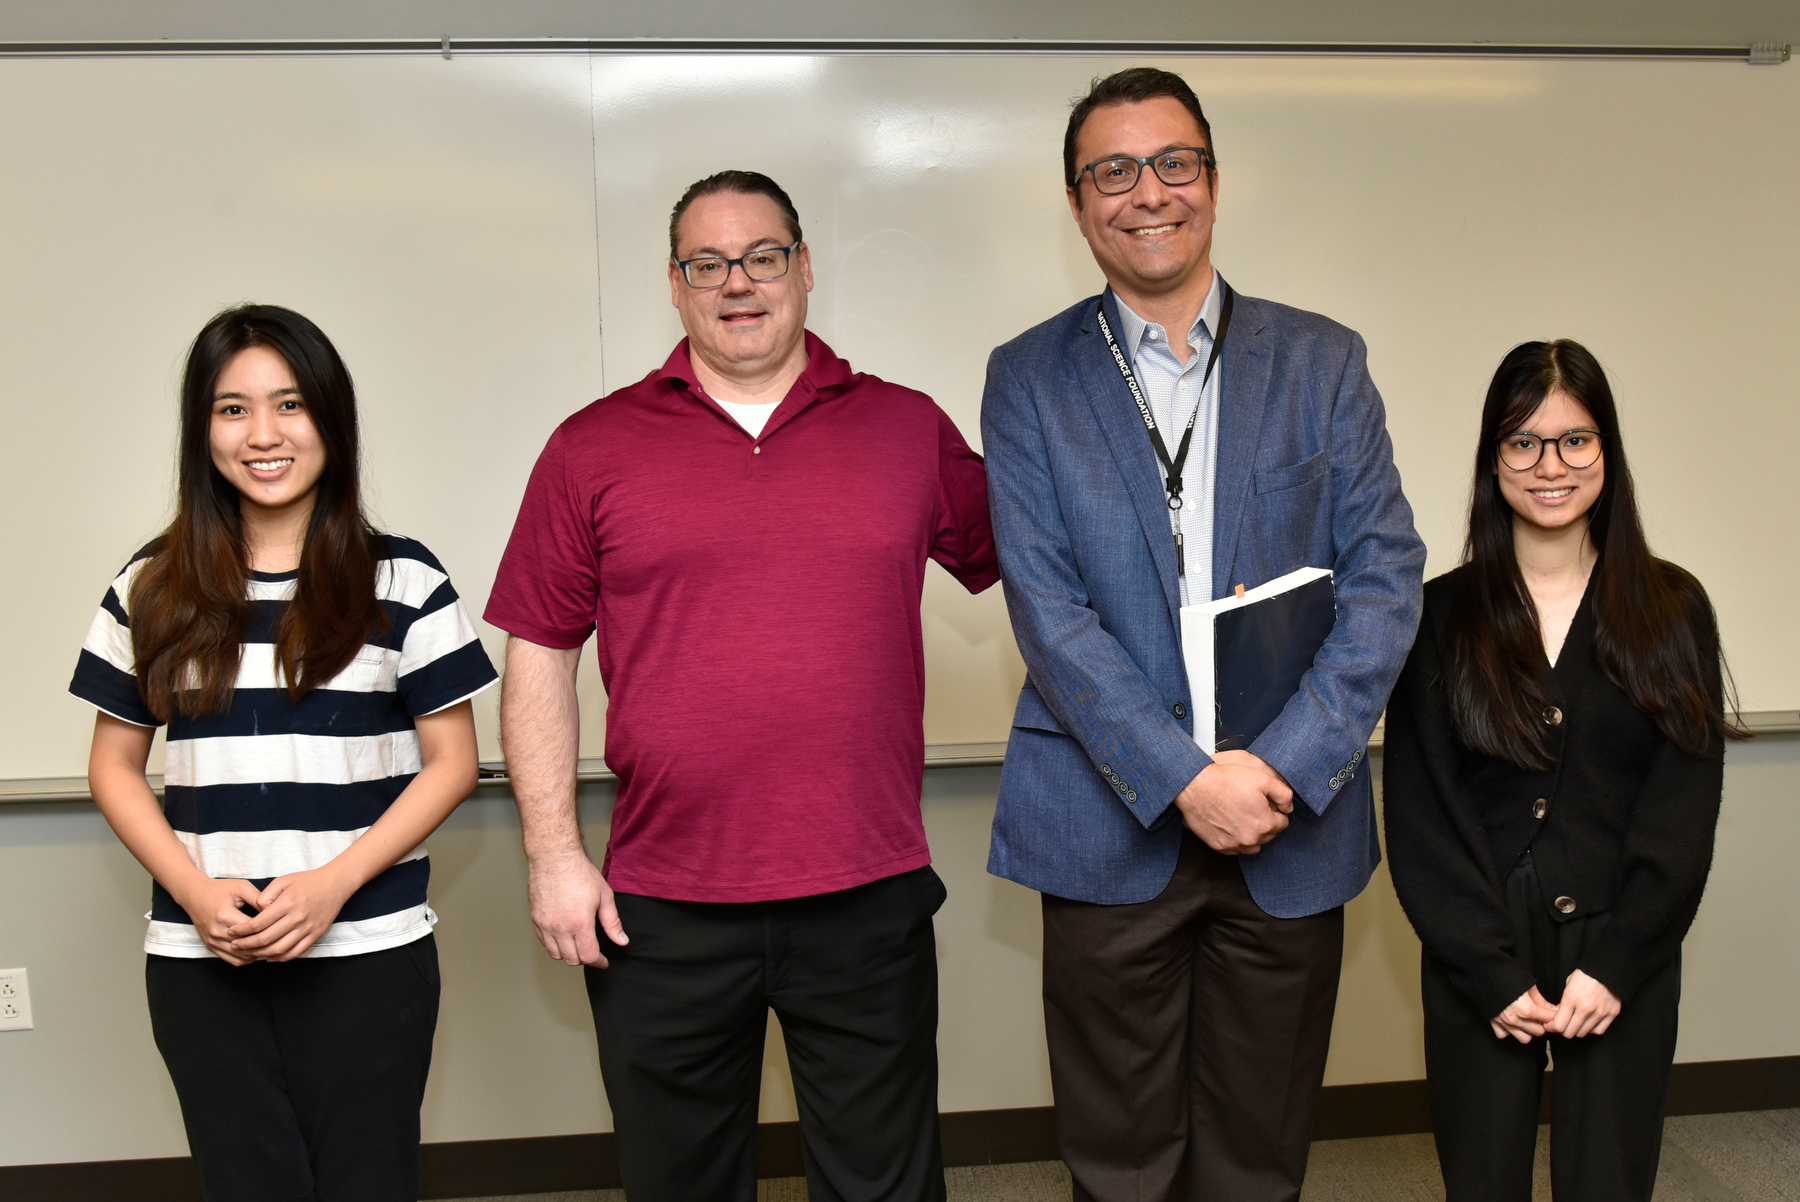 Gary Baker, a 1995 alumnus and associate professor of chemistry at the University of Missouri, met Nov. 11 with chemistry faculty and students and spoke to classes in the Shineman Center.